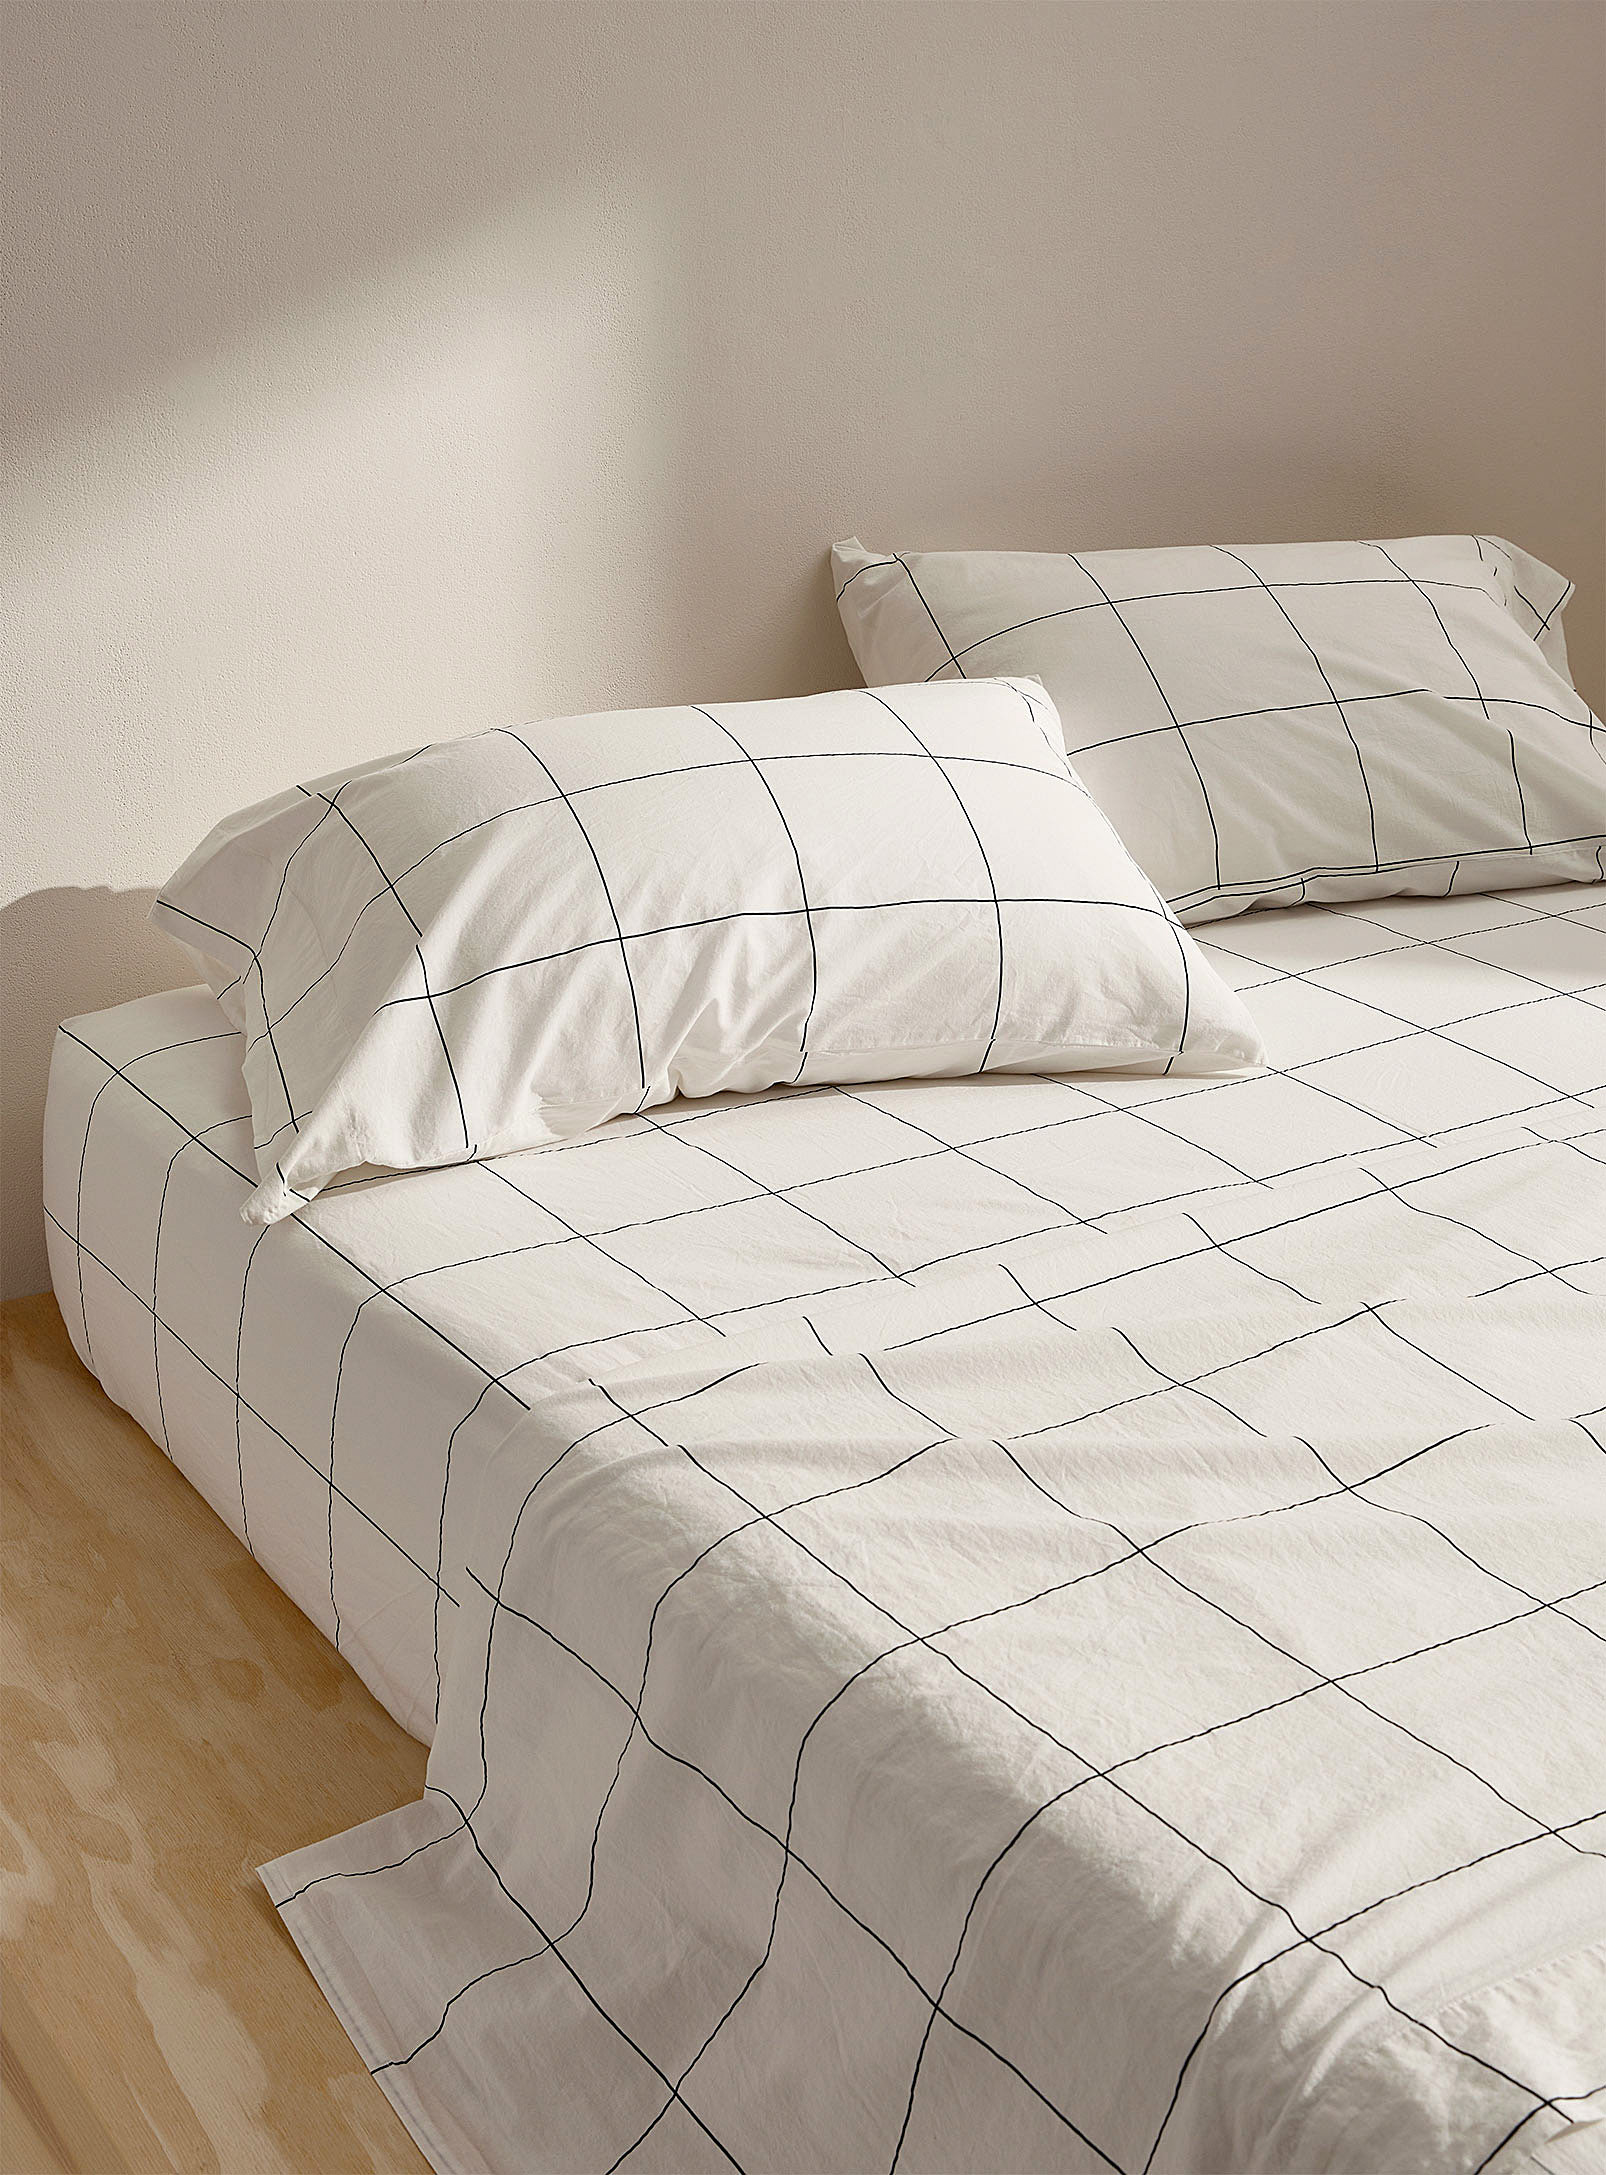 Simons Maison Windowpane Checks Bedsheet Set Fits Mattresses Up To 16 In In Black And White